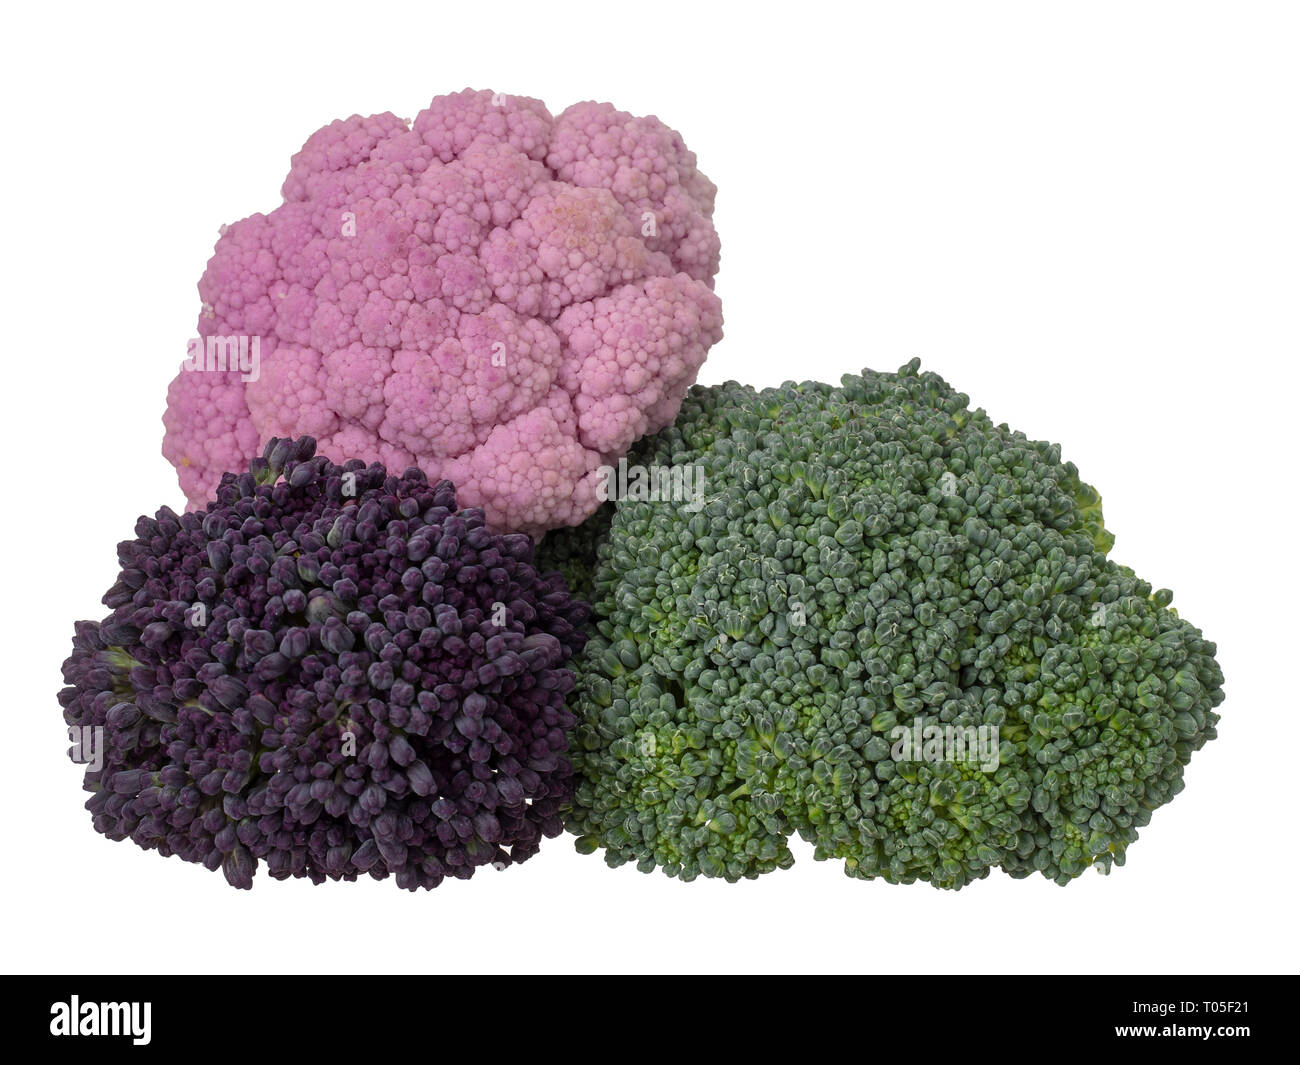 Naturally colourful vegetables, isolated on white. Raw cauliflower, broccoli and purple sprouting florets. Healthy assortment. Stock Photo